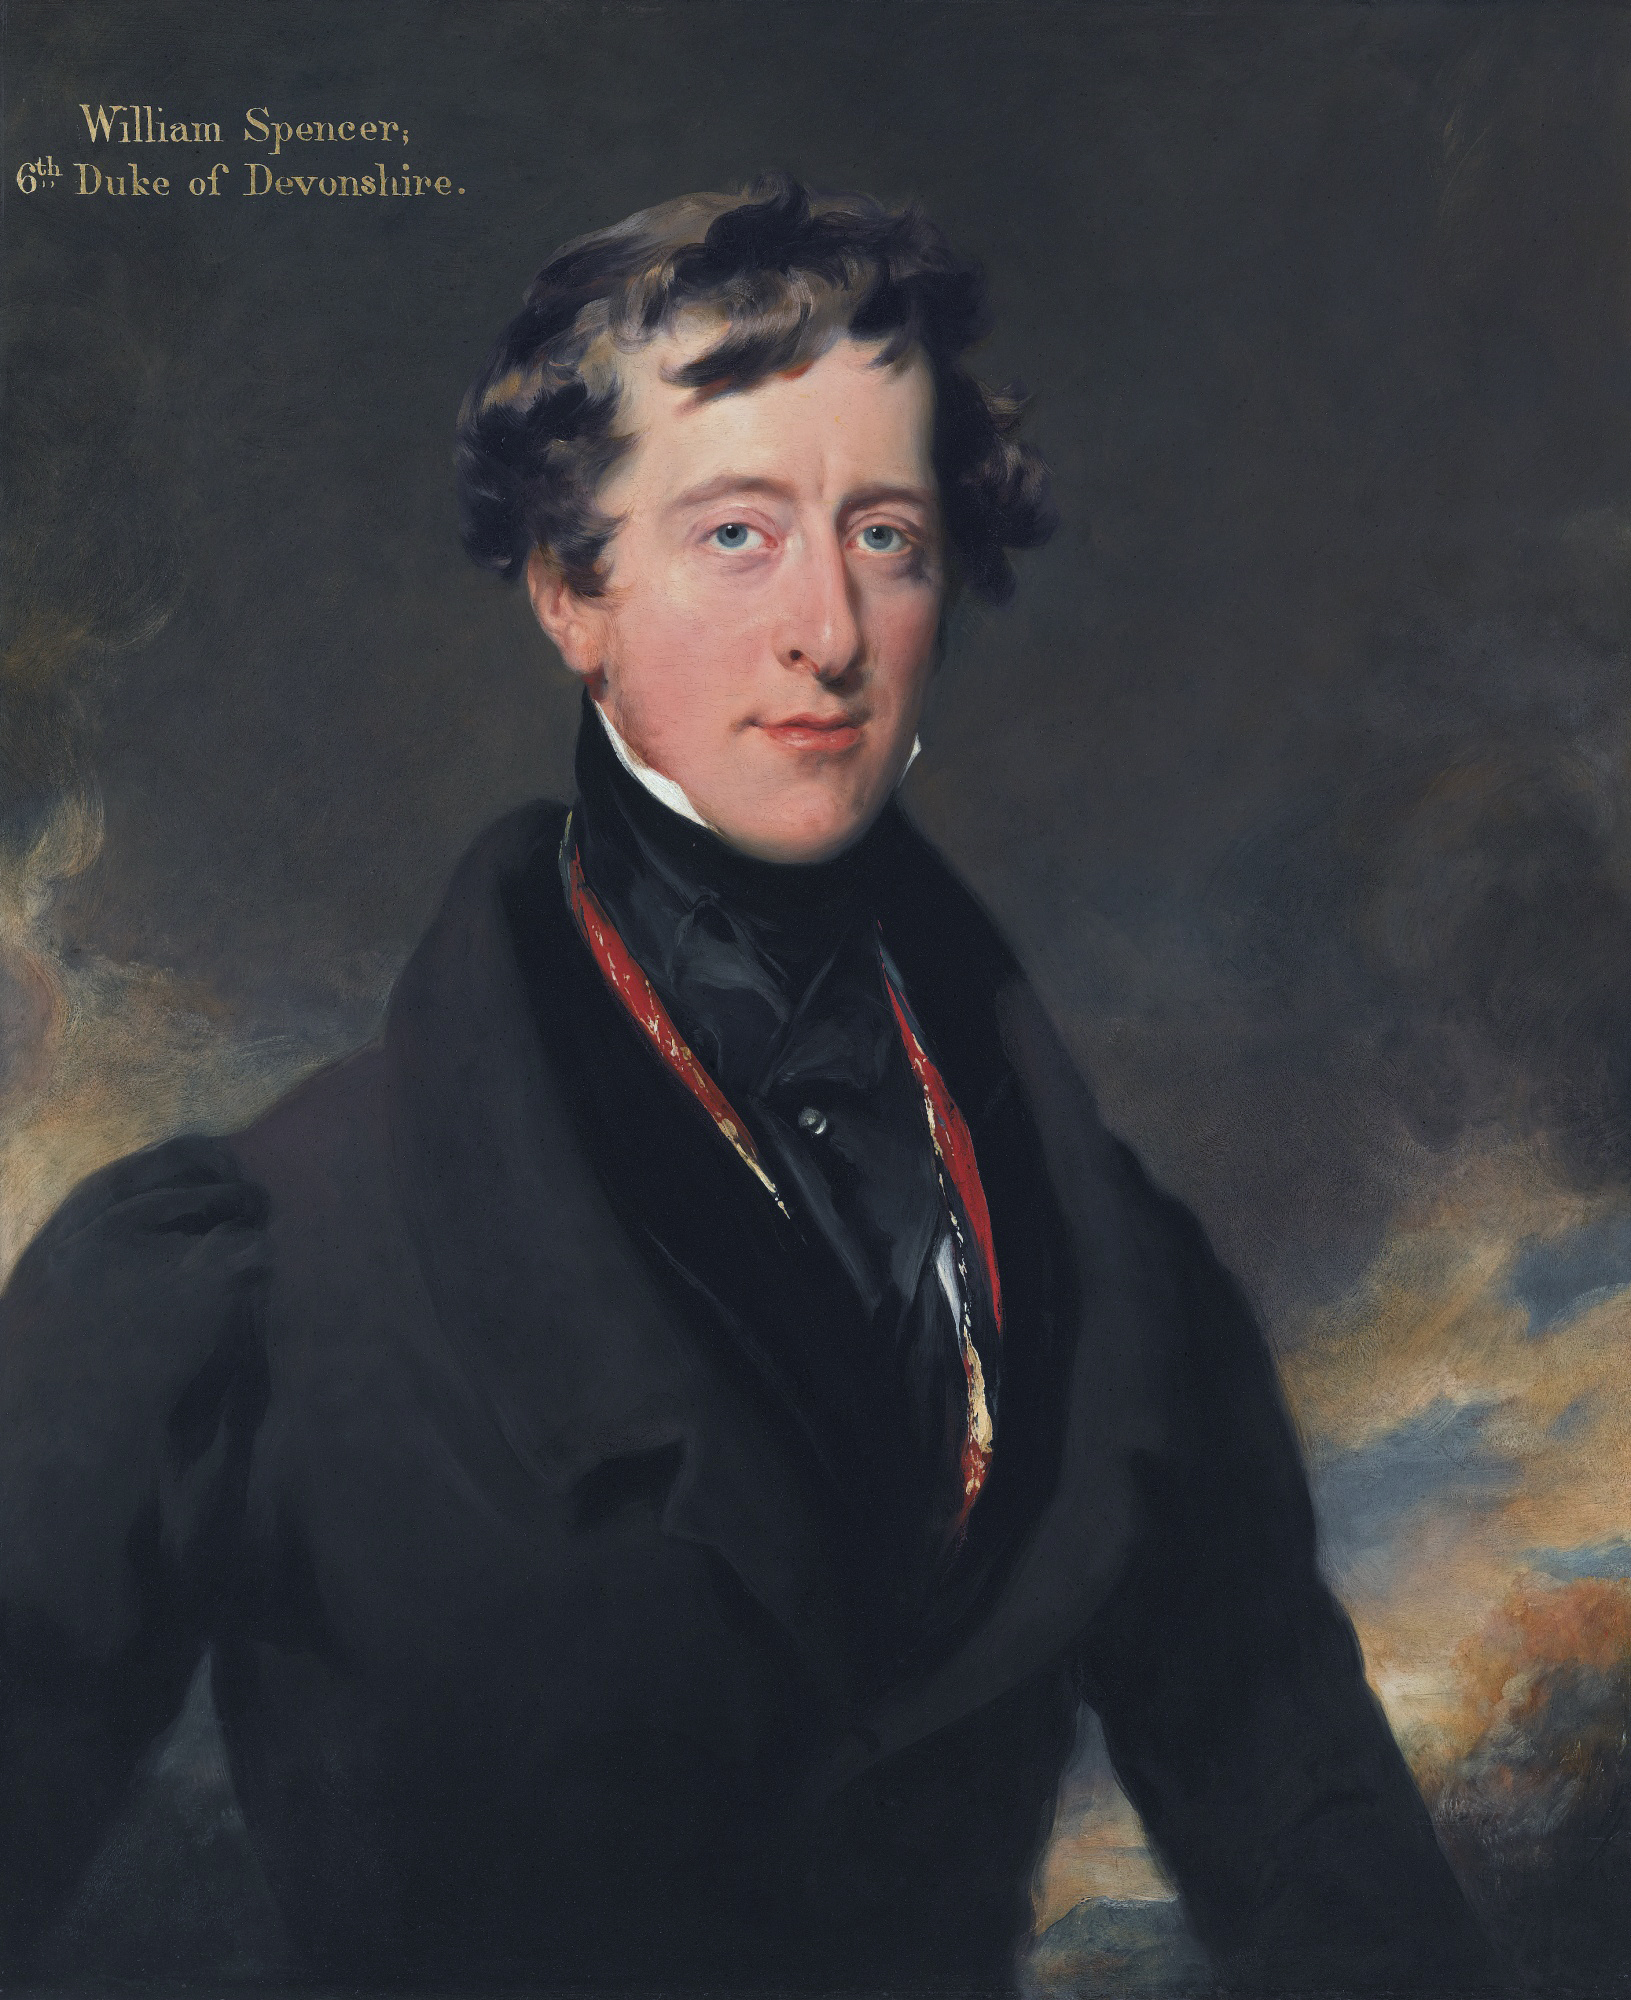 William Spencer, 6th Duke of Devonshire by Thomas Lawrence